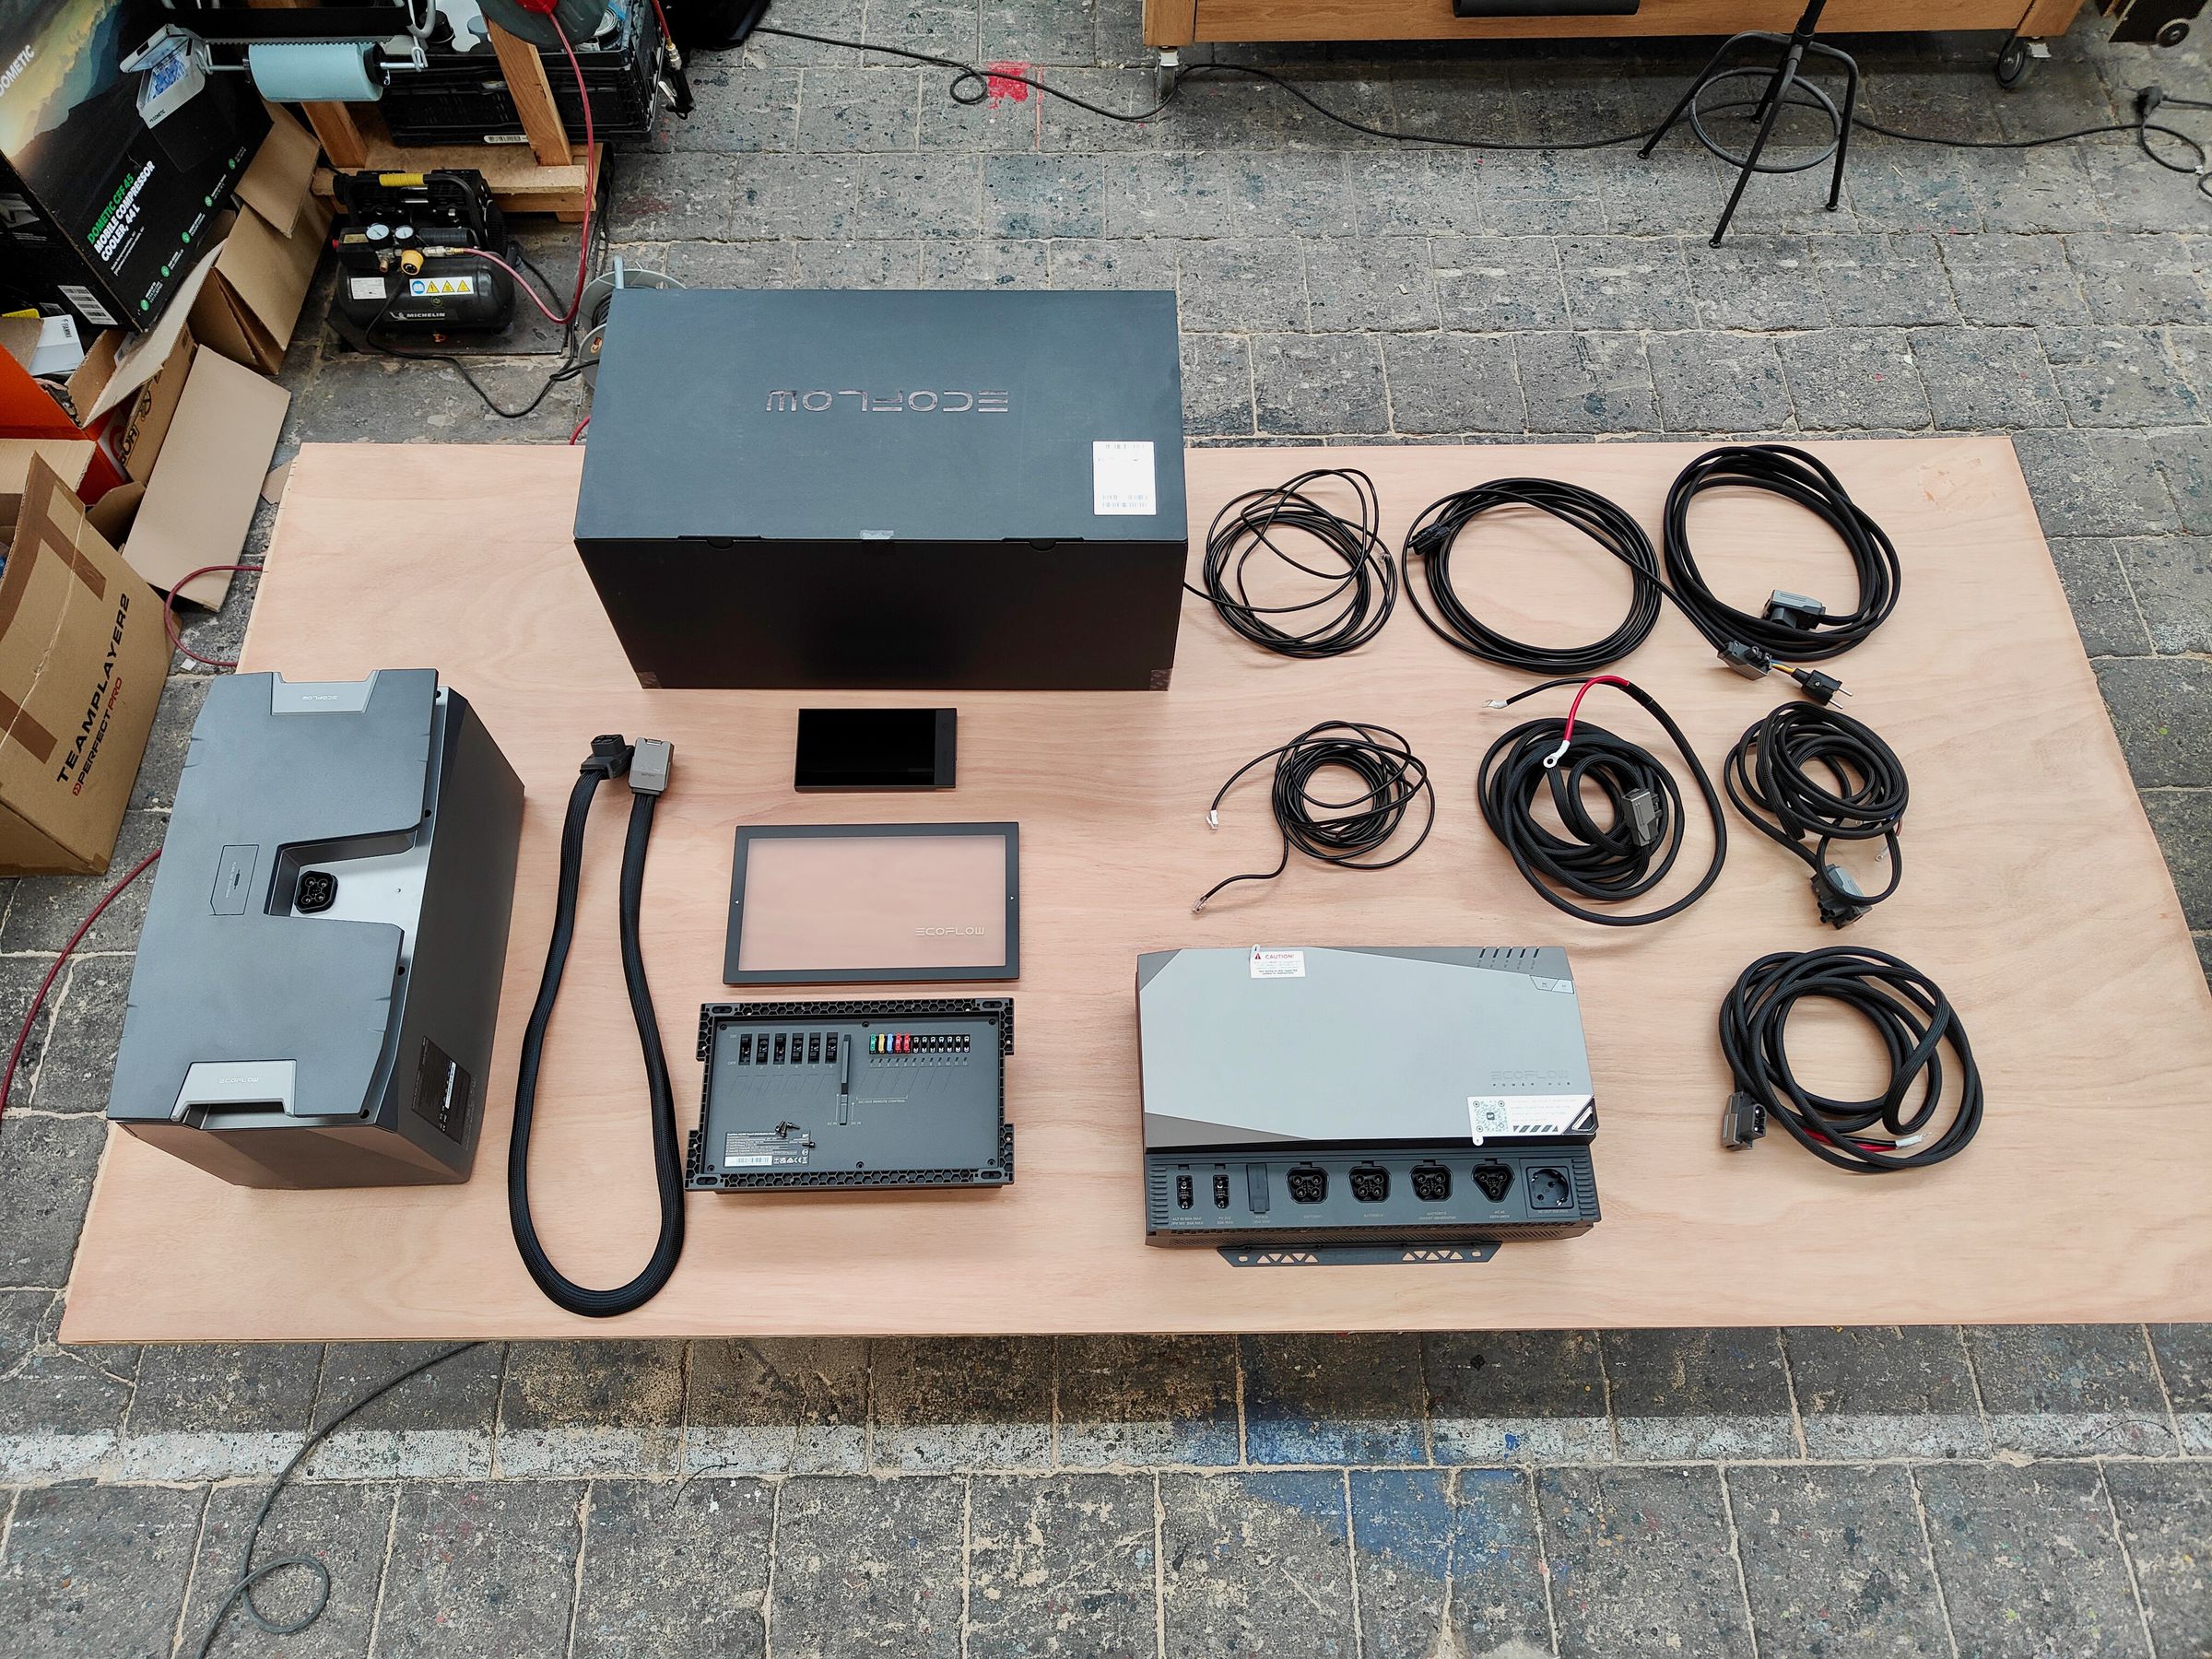 The EcoFlow Power Kit. From left to right: one 5kWh battery, the battery cable, and the Power Kit box. Below the box is the console display and AC/DC Smart Distribution Panel and cover. Then you see the included Power Hub cabling, and the Power Hub itself.